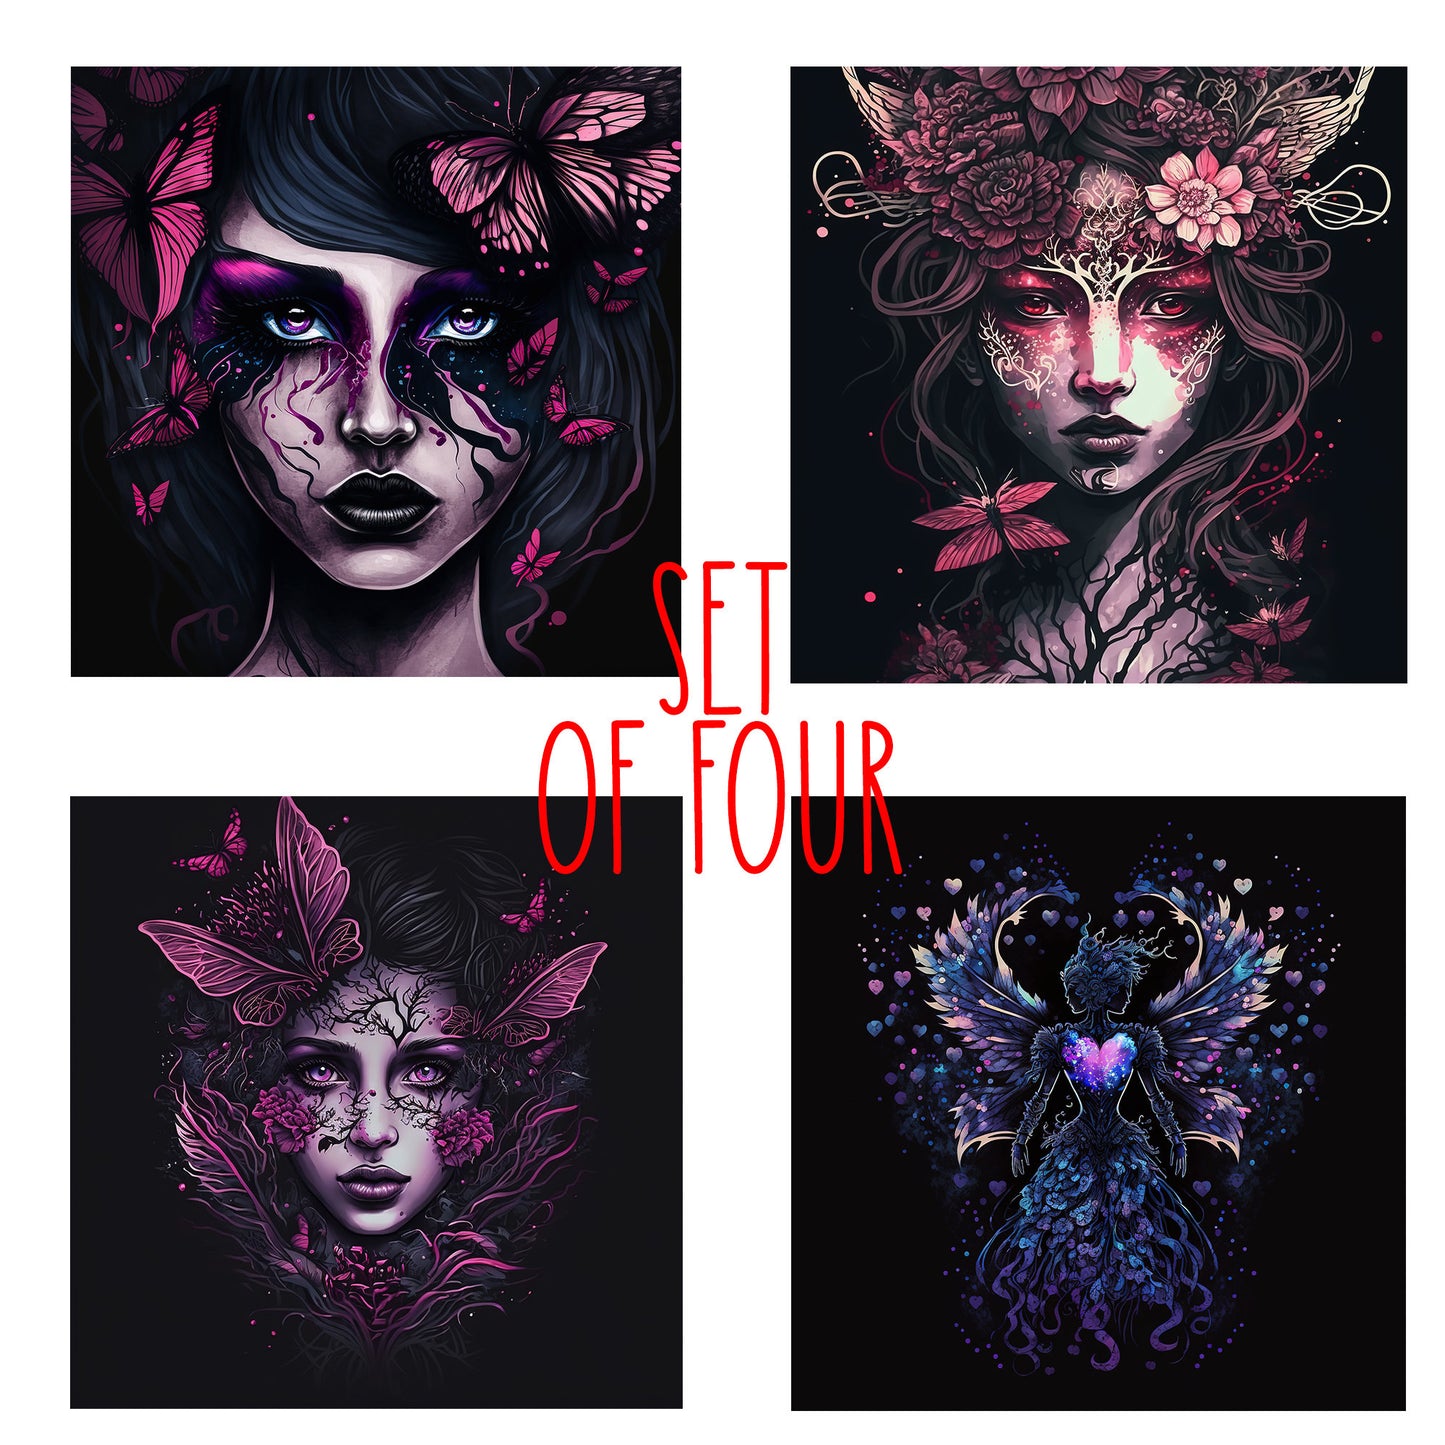 Gothic Fae Art Decorative Ceramic Tile Set with Optional Easel Back - Available in 4 sizes - Set of 4